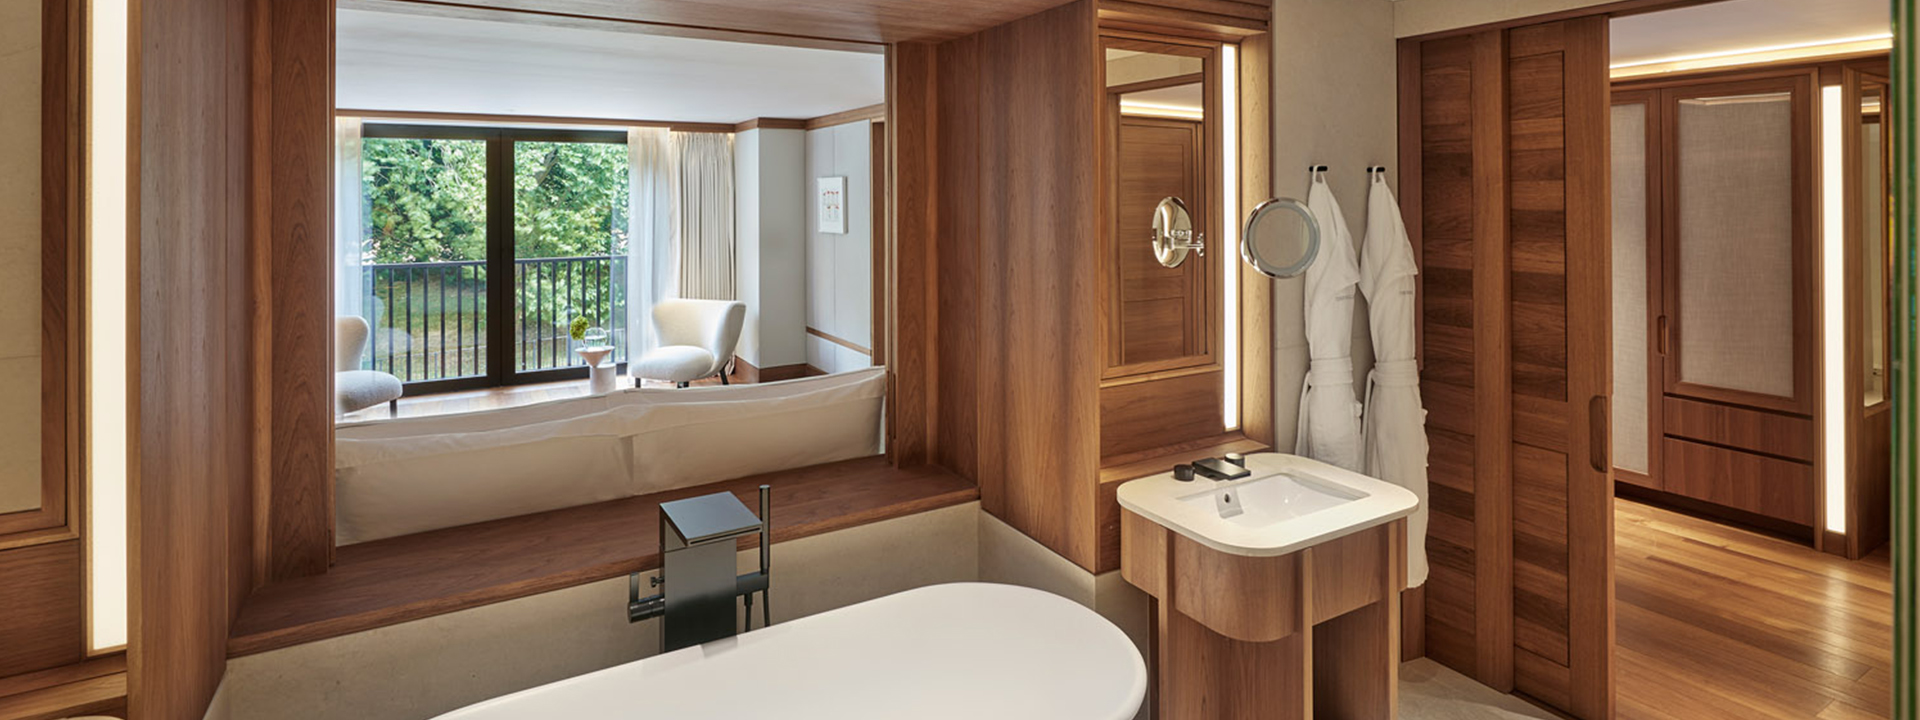 Park Suite at The Berkeley - bathroom view with bath and sinks and view onto the lounge behind the bathtub.